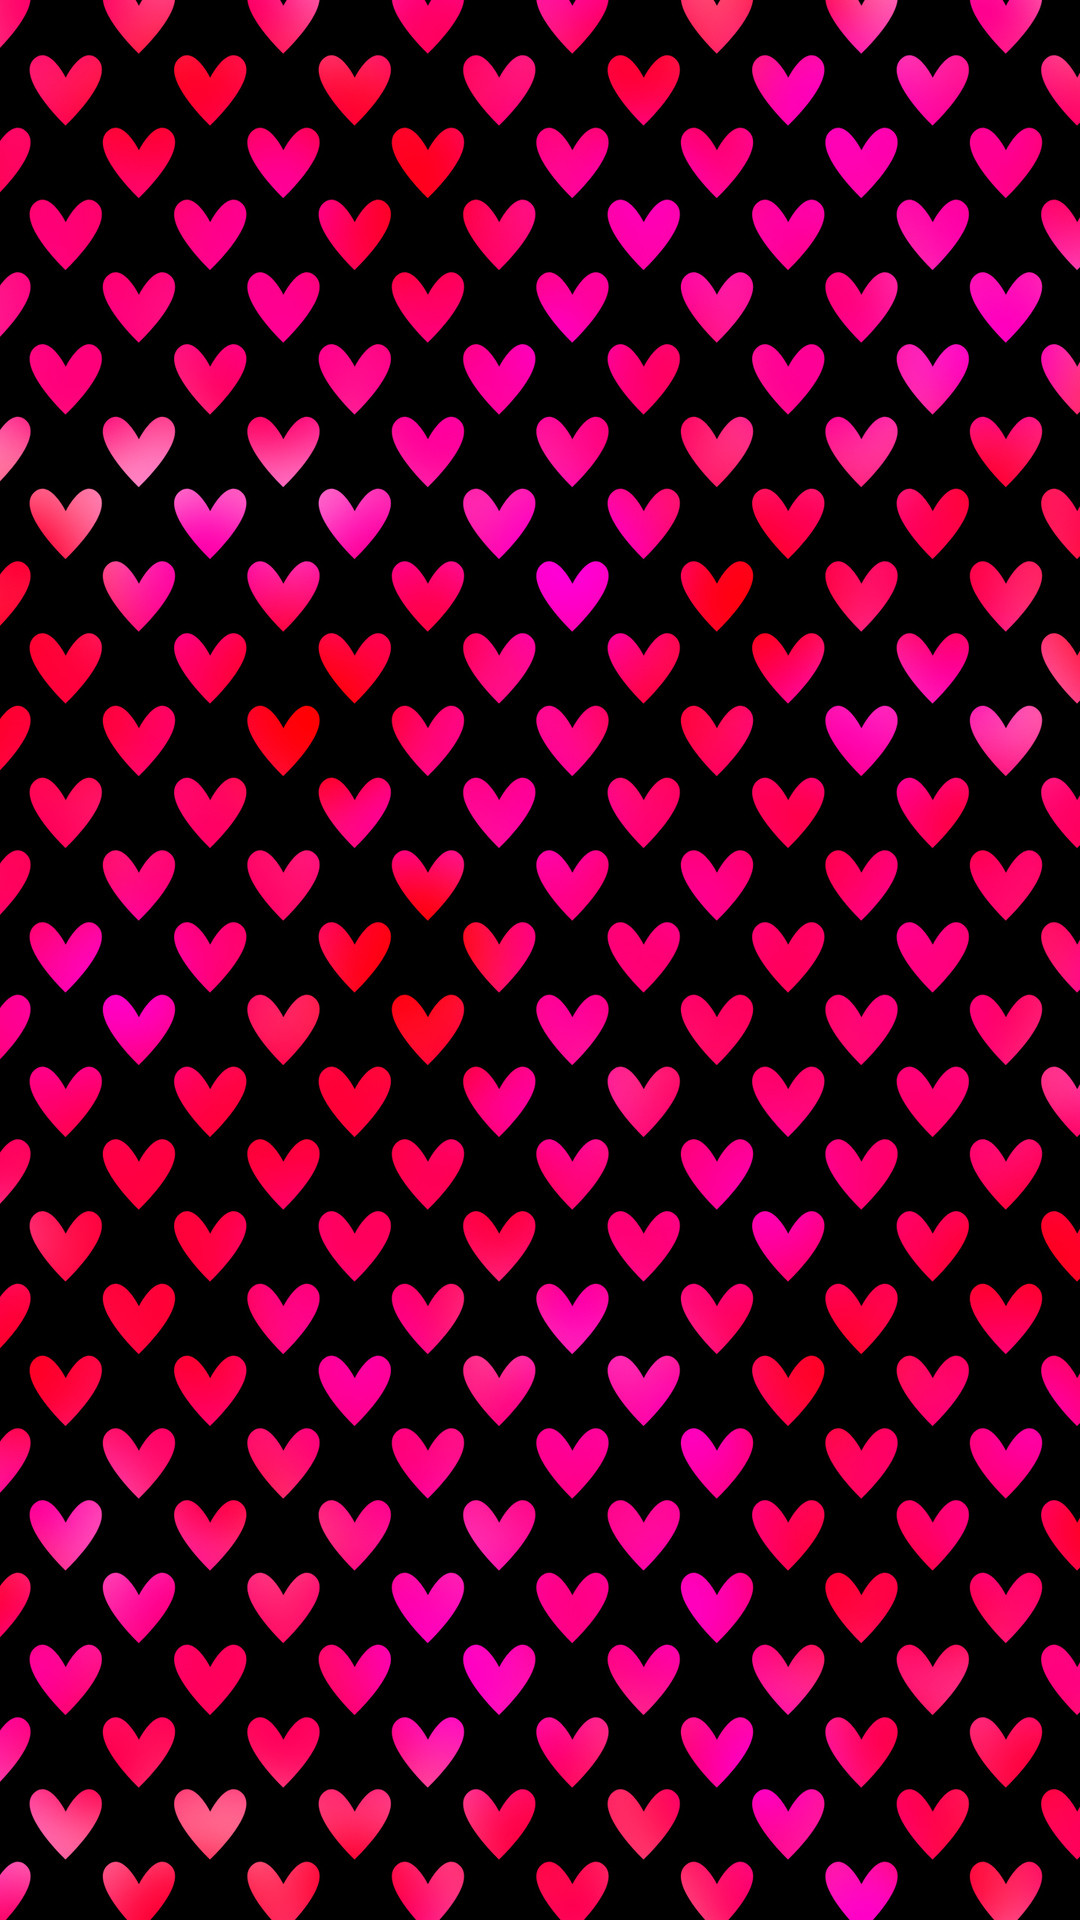 Red and pink hearts Wallpaper